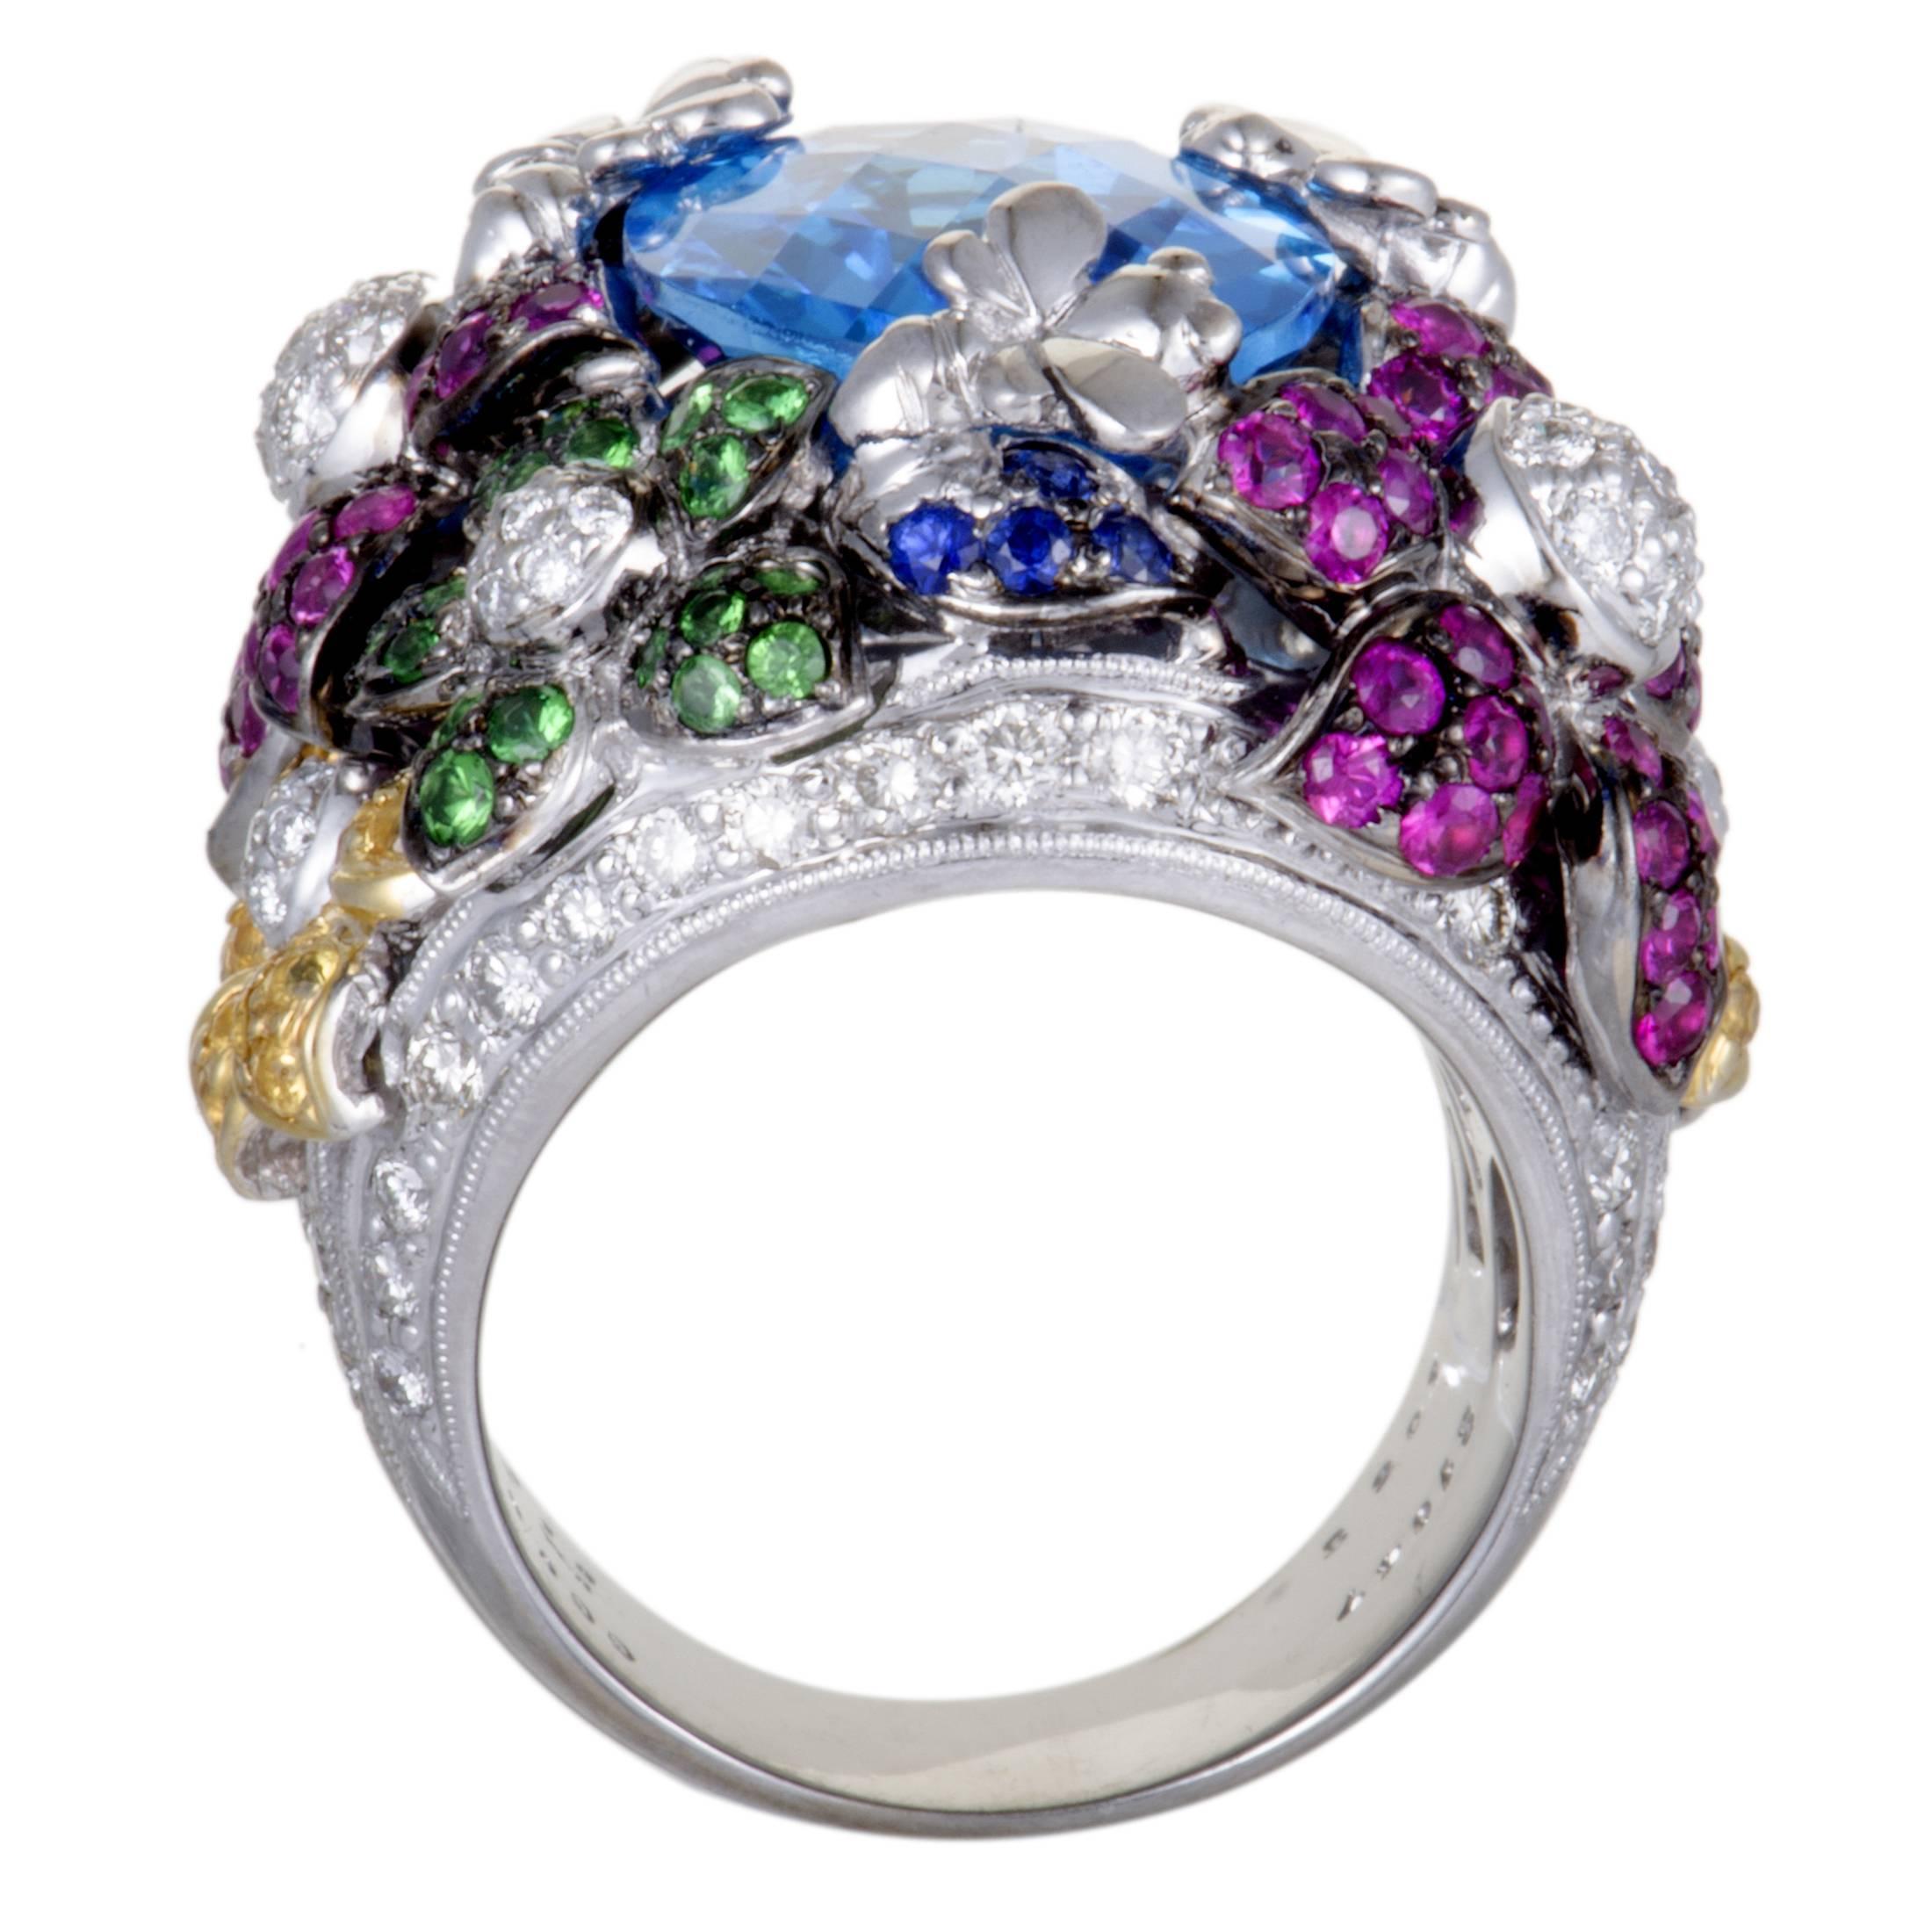 Spectacularly embellished in 1.18ct of sparkling diamonds, 10.55ct of exquisite garnets, 2.01ct of captivating sapphires and a magnificent topaz of 10.47ct , this sensational floral ring embodies glamour and splendor. Stunningly crafted in the